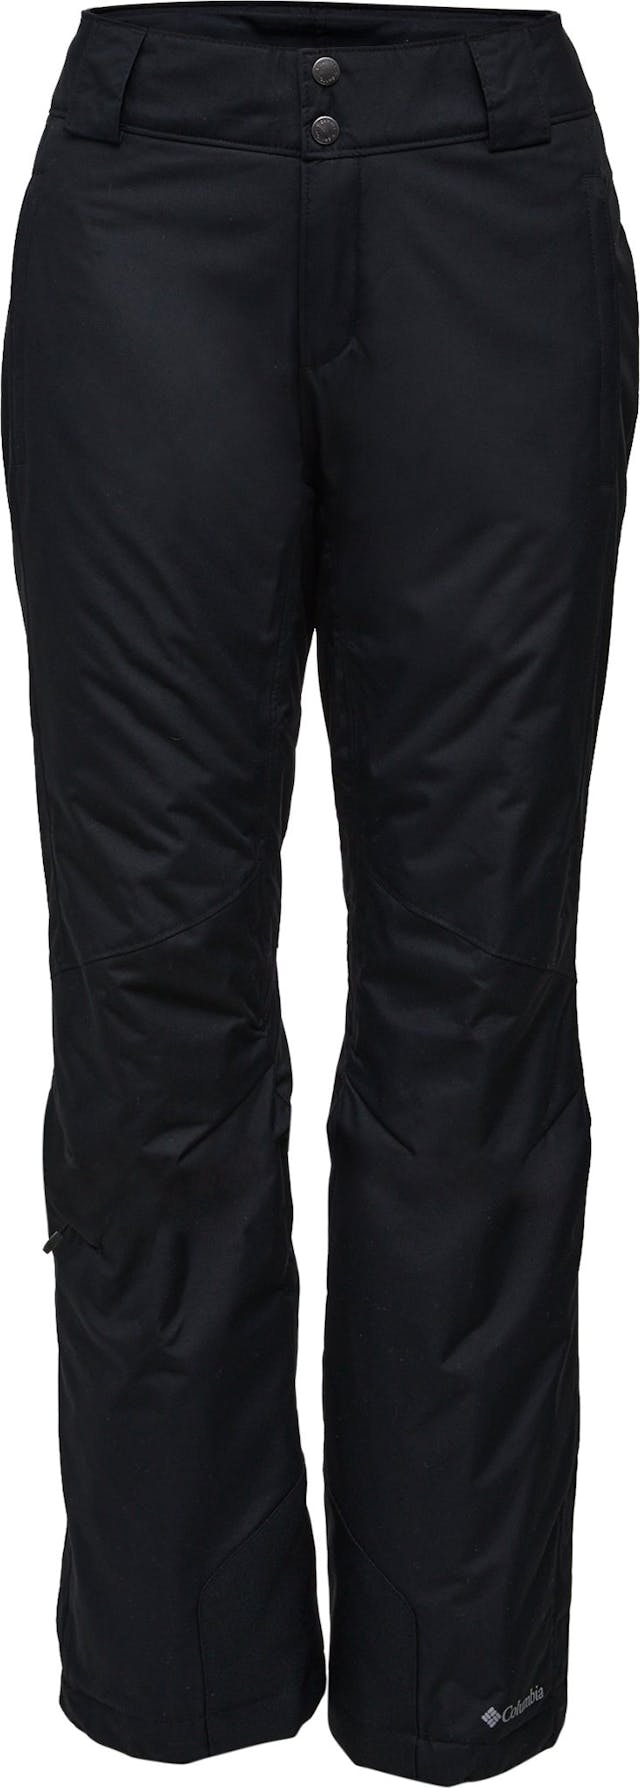 Product image for Bugaboo Omni-Heat Pant - Women's